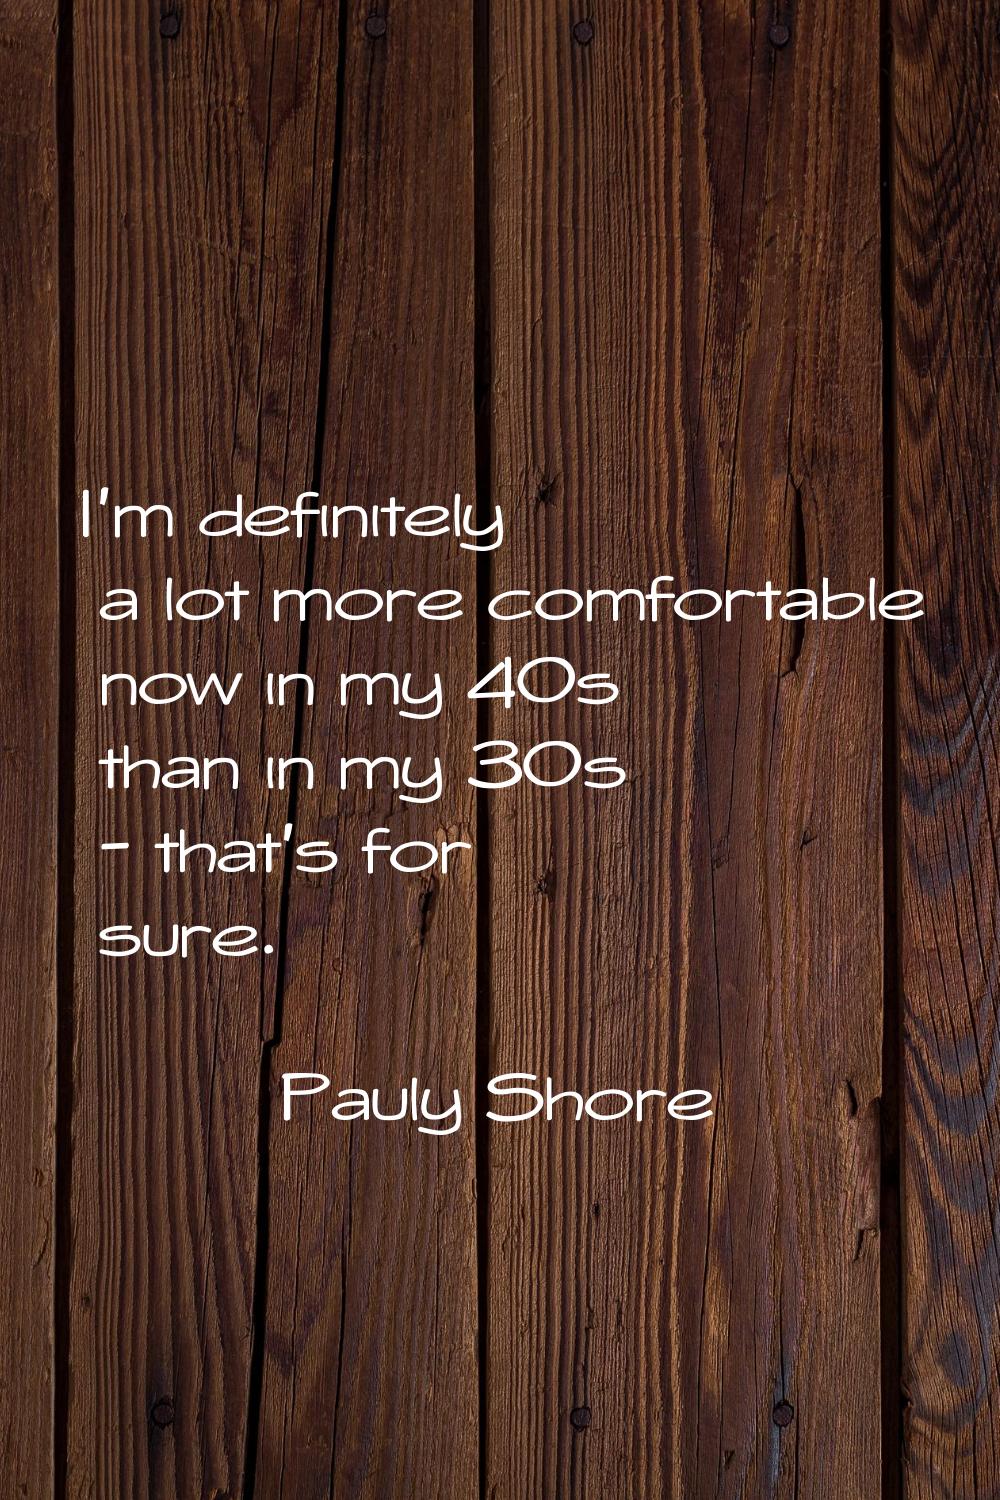 I'm definitely a lot more comfortable now in my 40s than in my 30s - that's for sure.